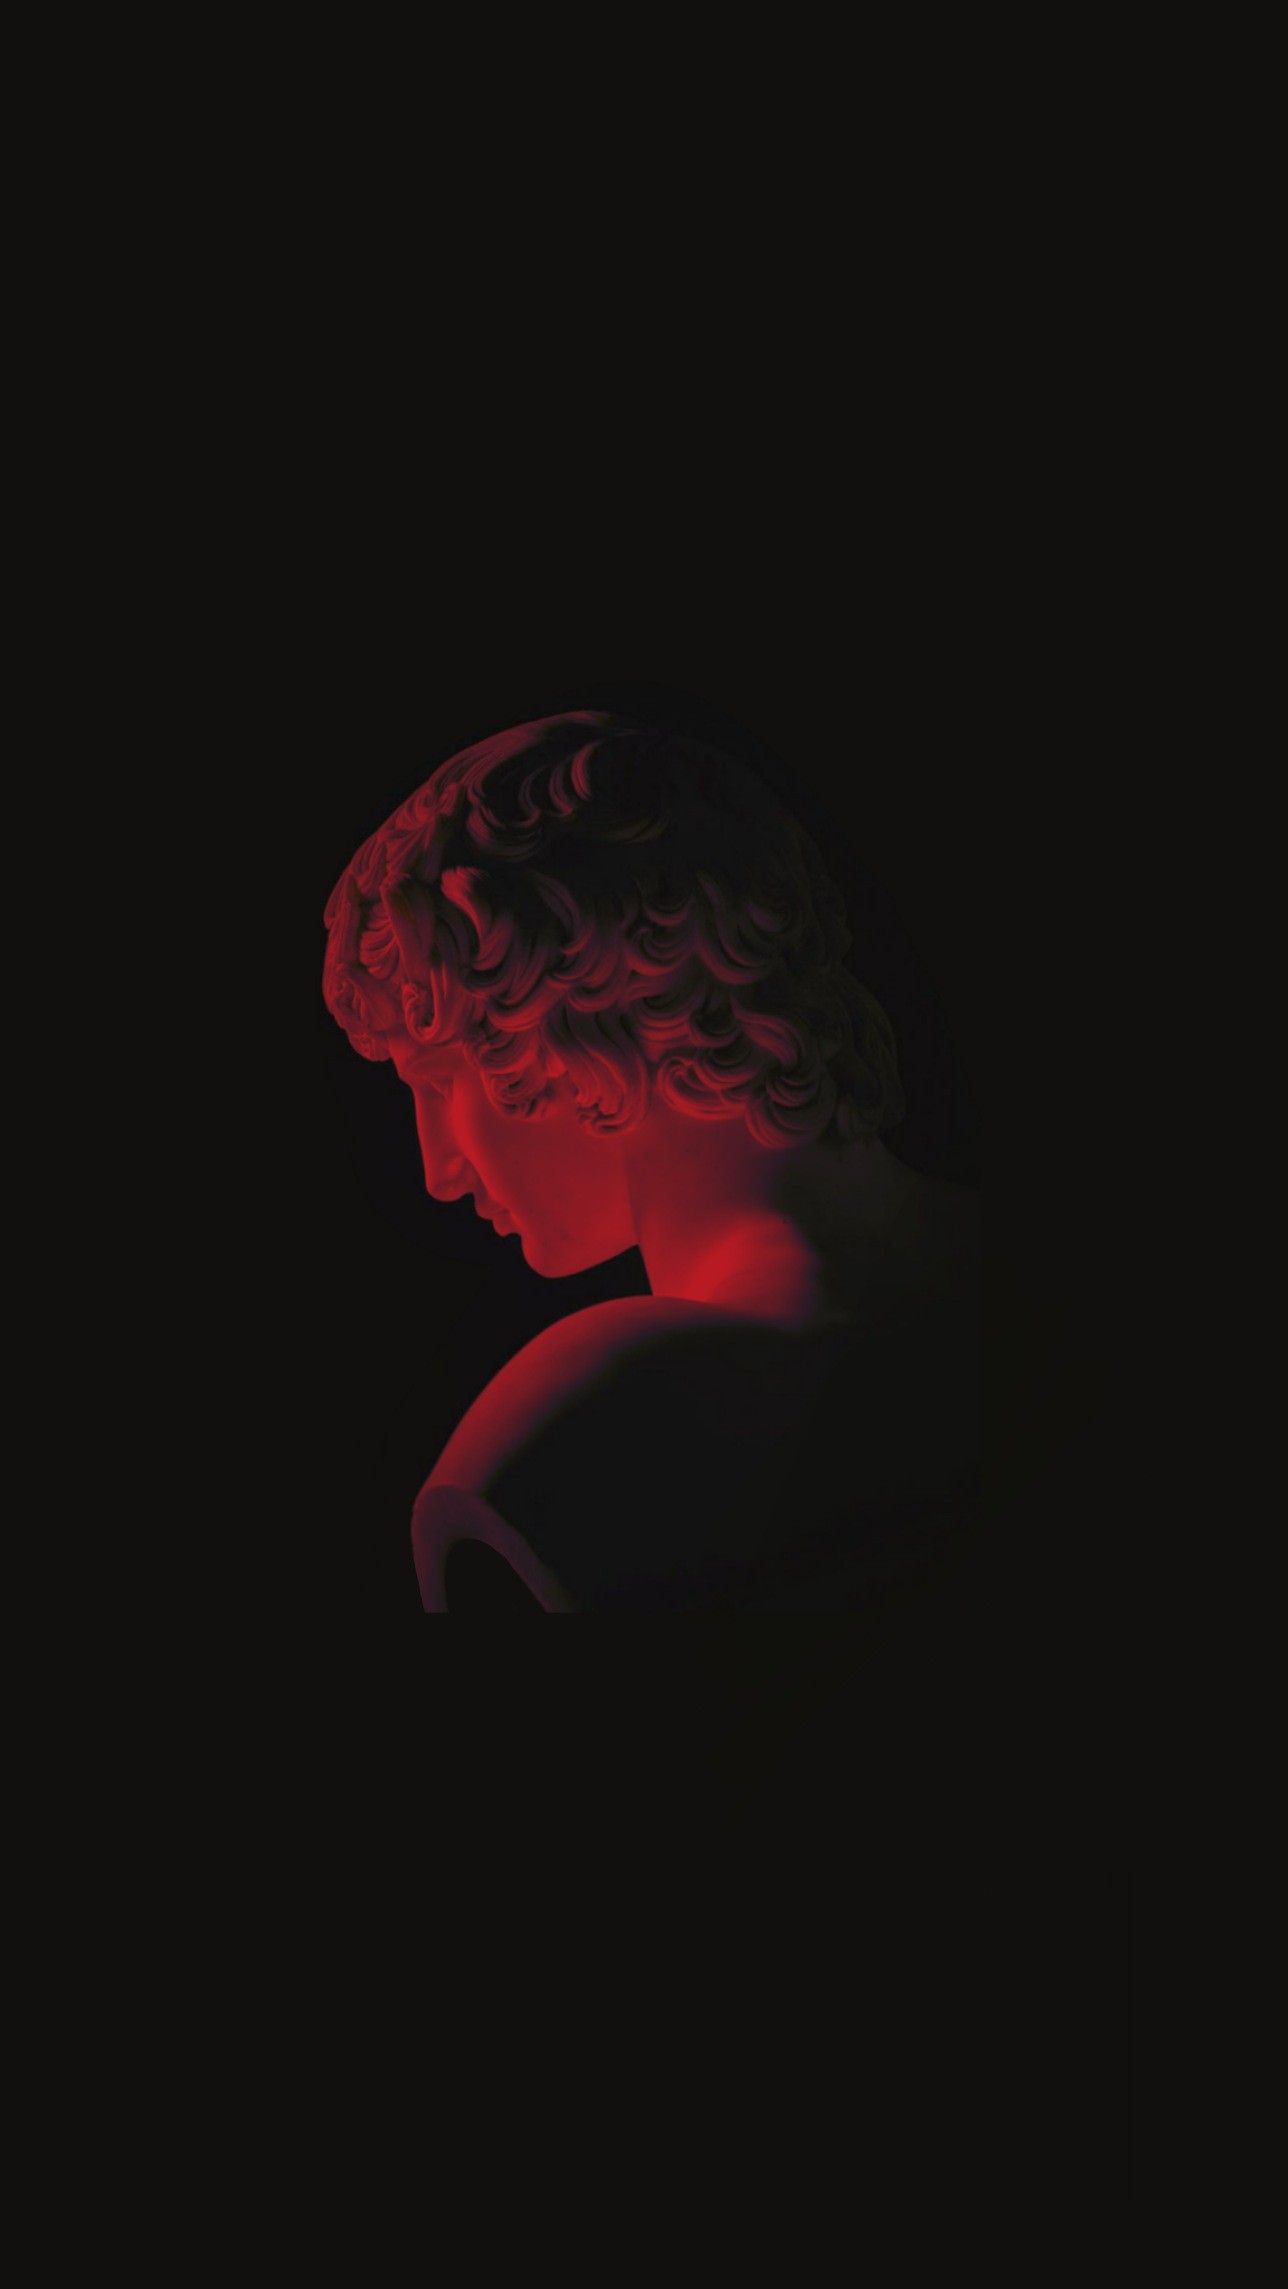 Aesthetic wallpaper of a red statue on a black background - Greek statue